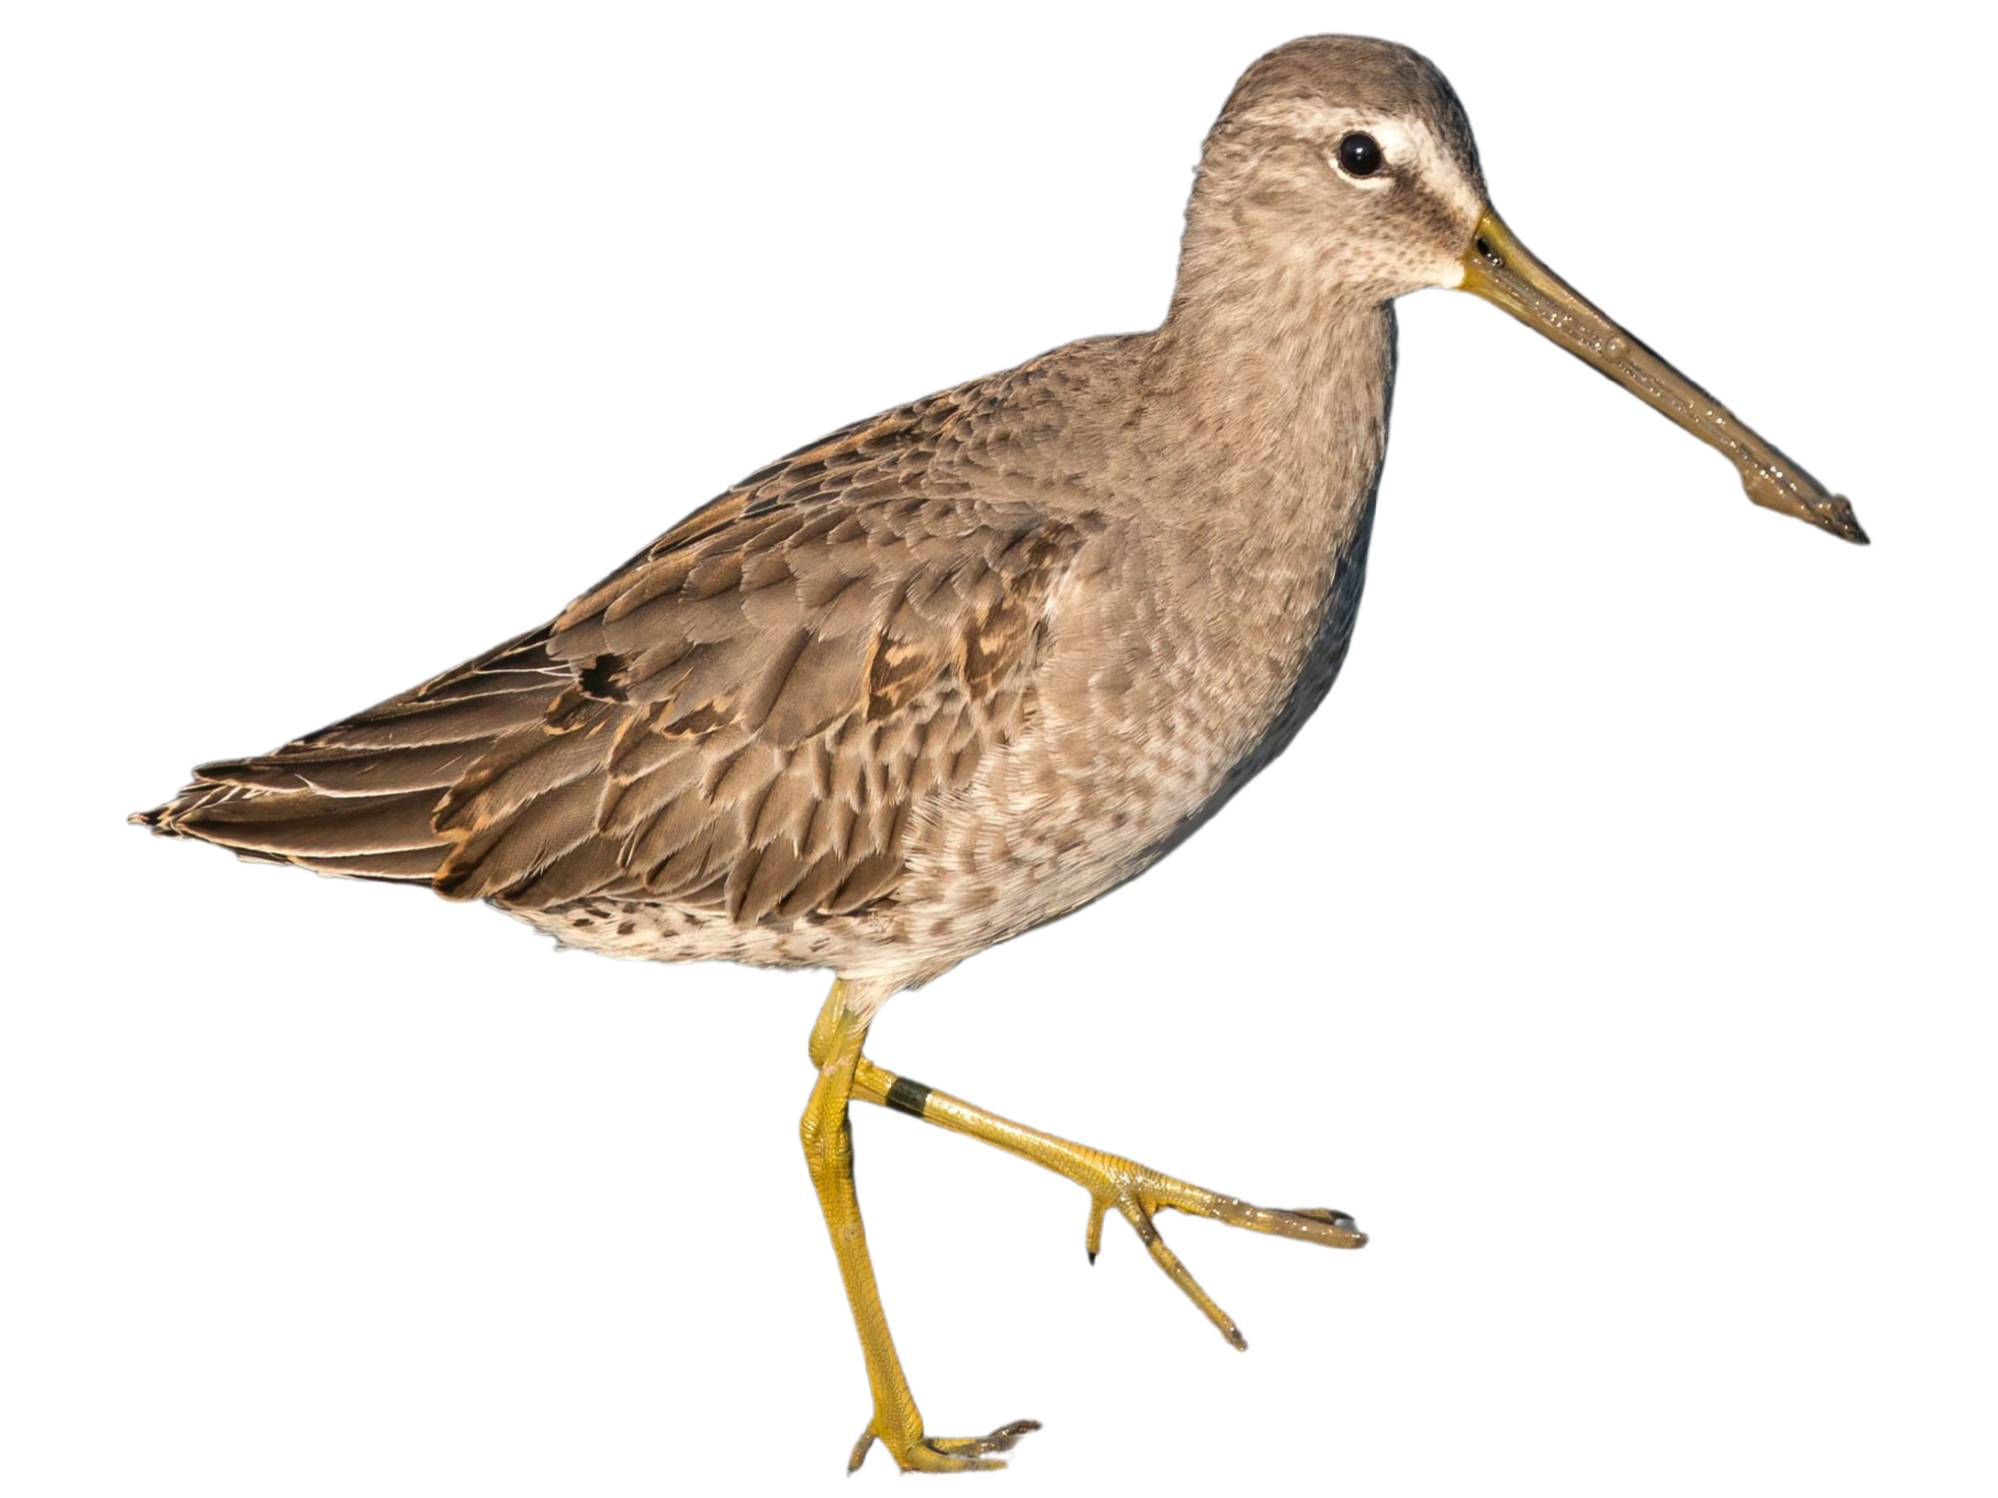 A photo of a Long-billed Dowitcher (Limnodromus scolopaceus)